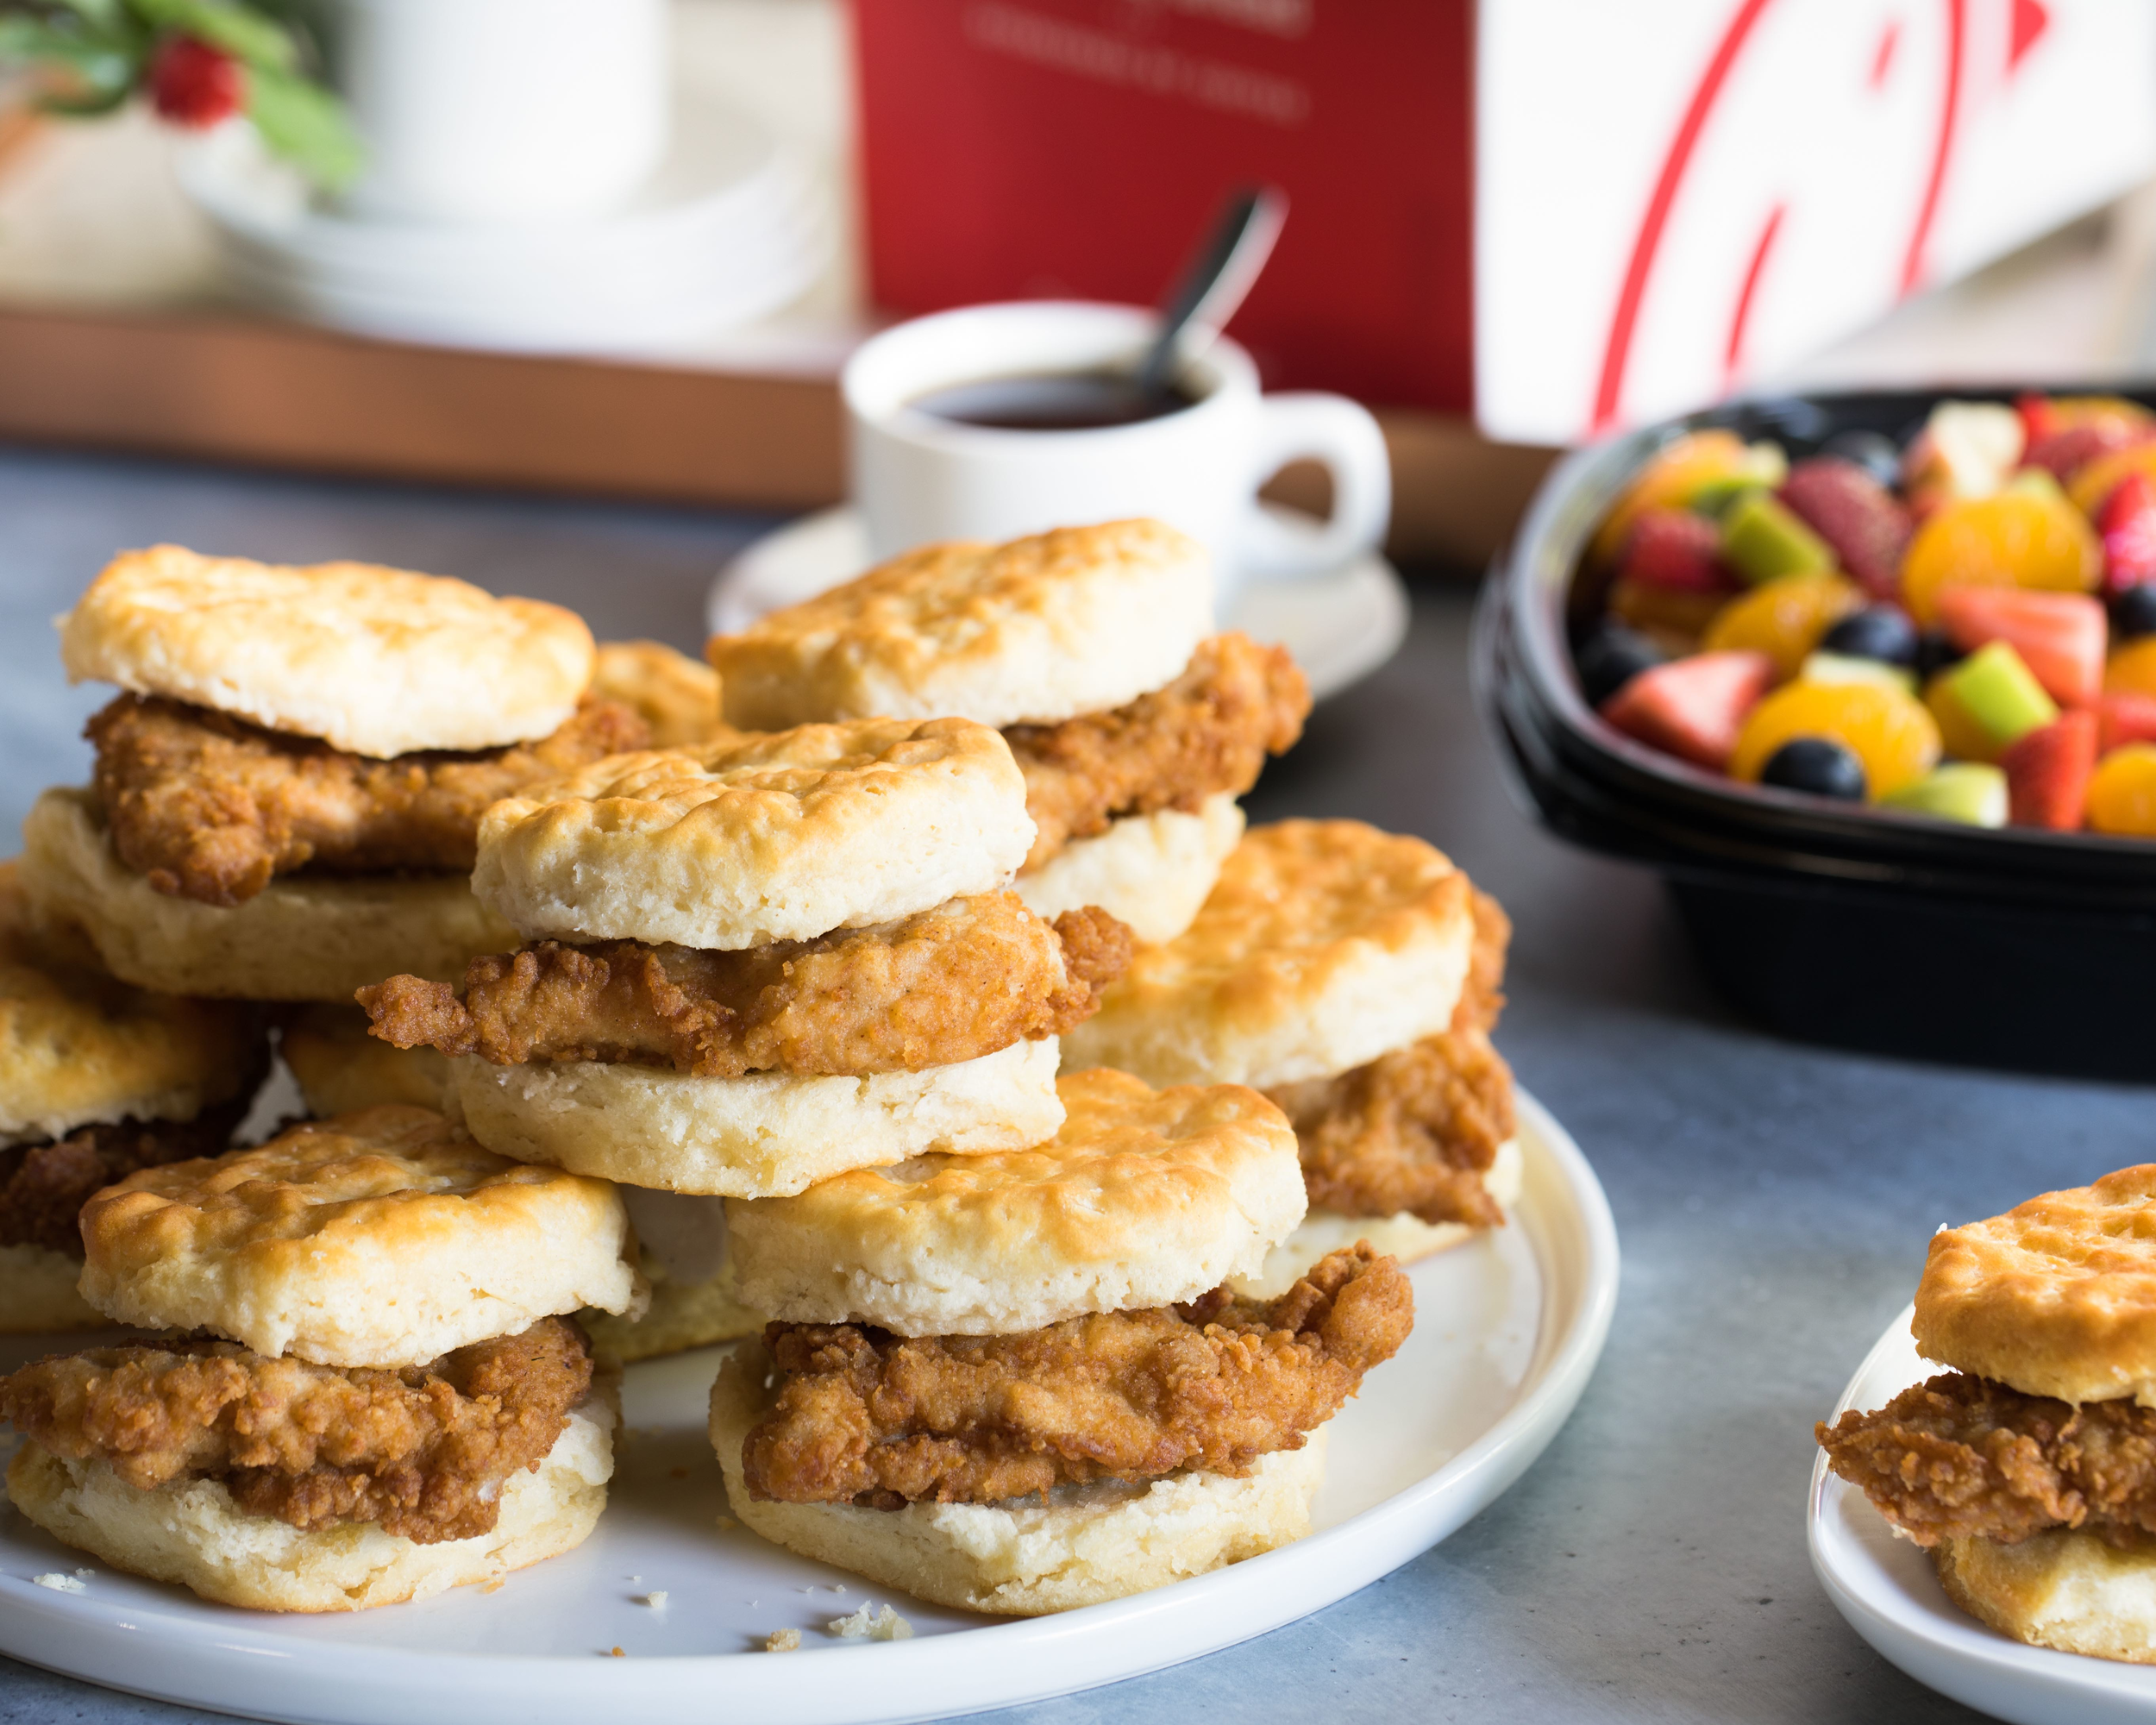 Chick-fil-A Chicken biscuits with coffee and fruit